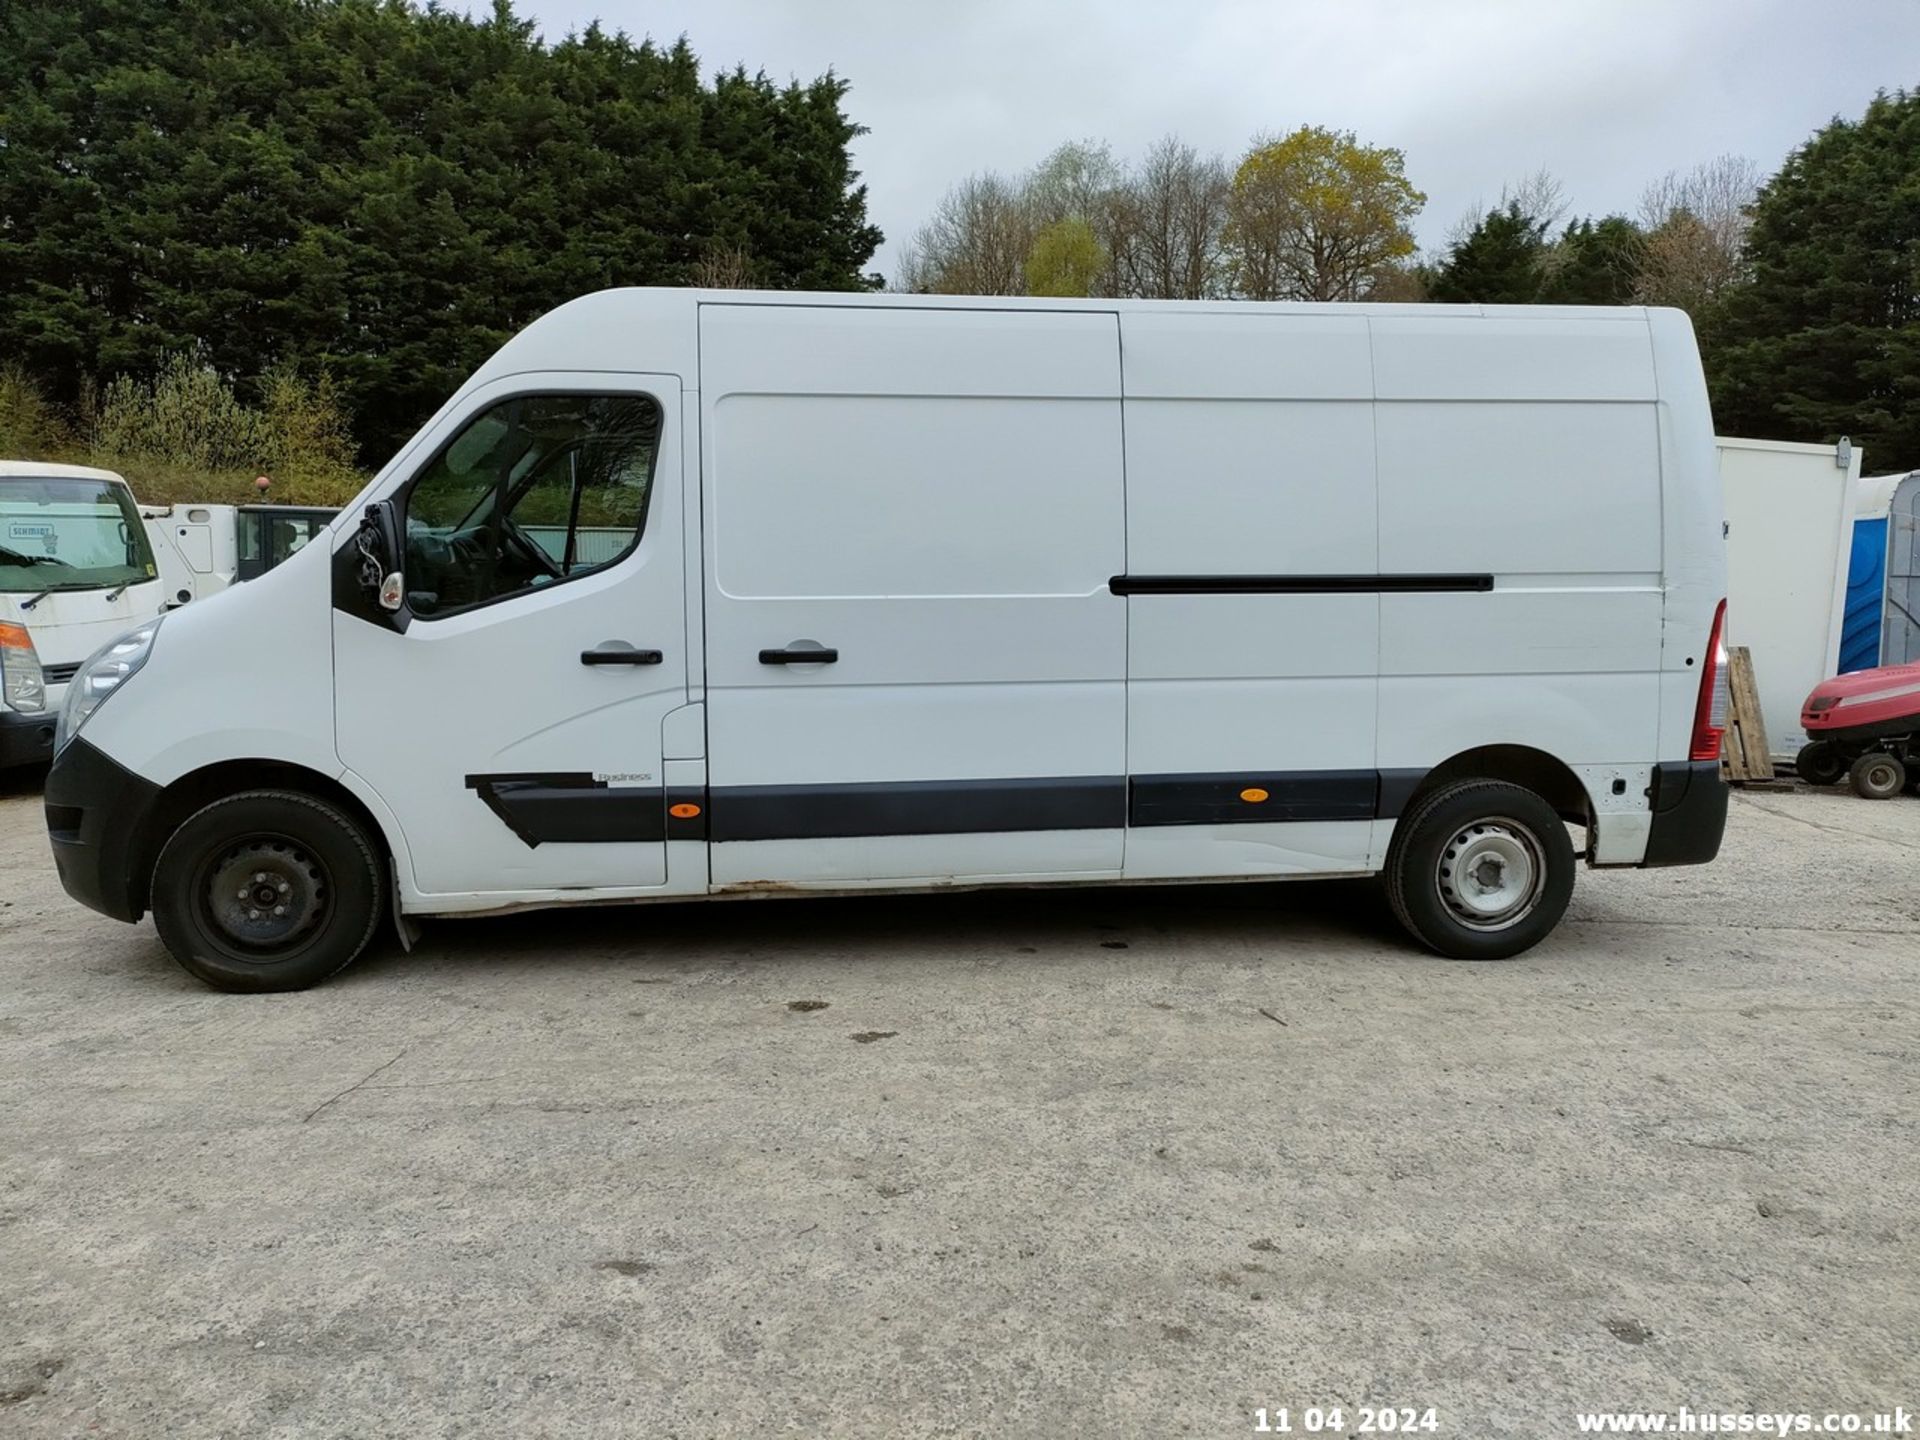 18/68 RENAULT MASTER LM35 BUSINESS DCI - 2298cc 5dr Van (White) - Image 20 of 68